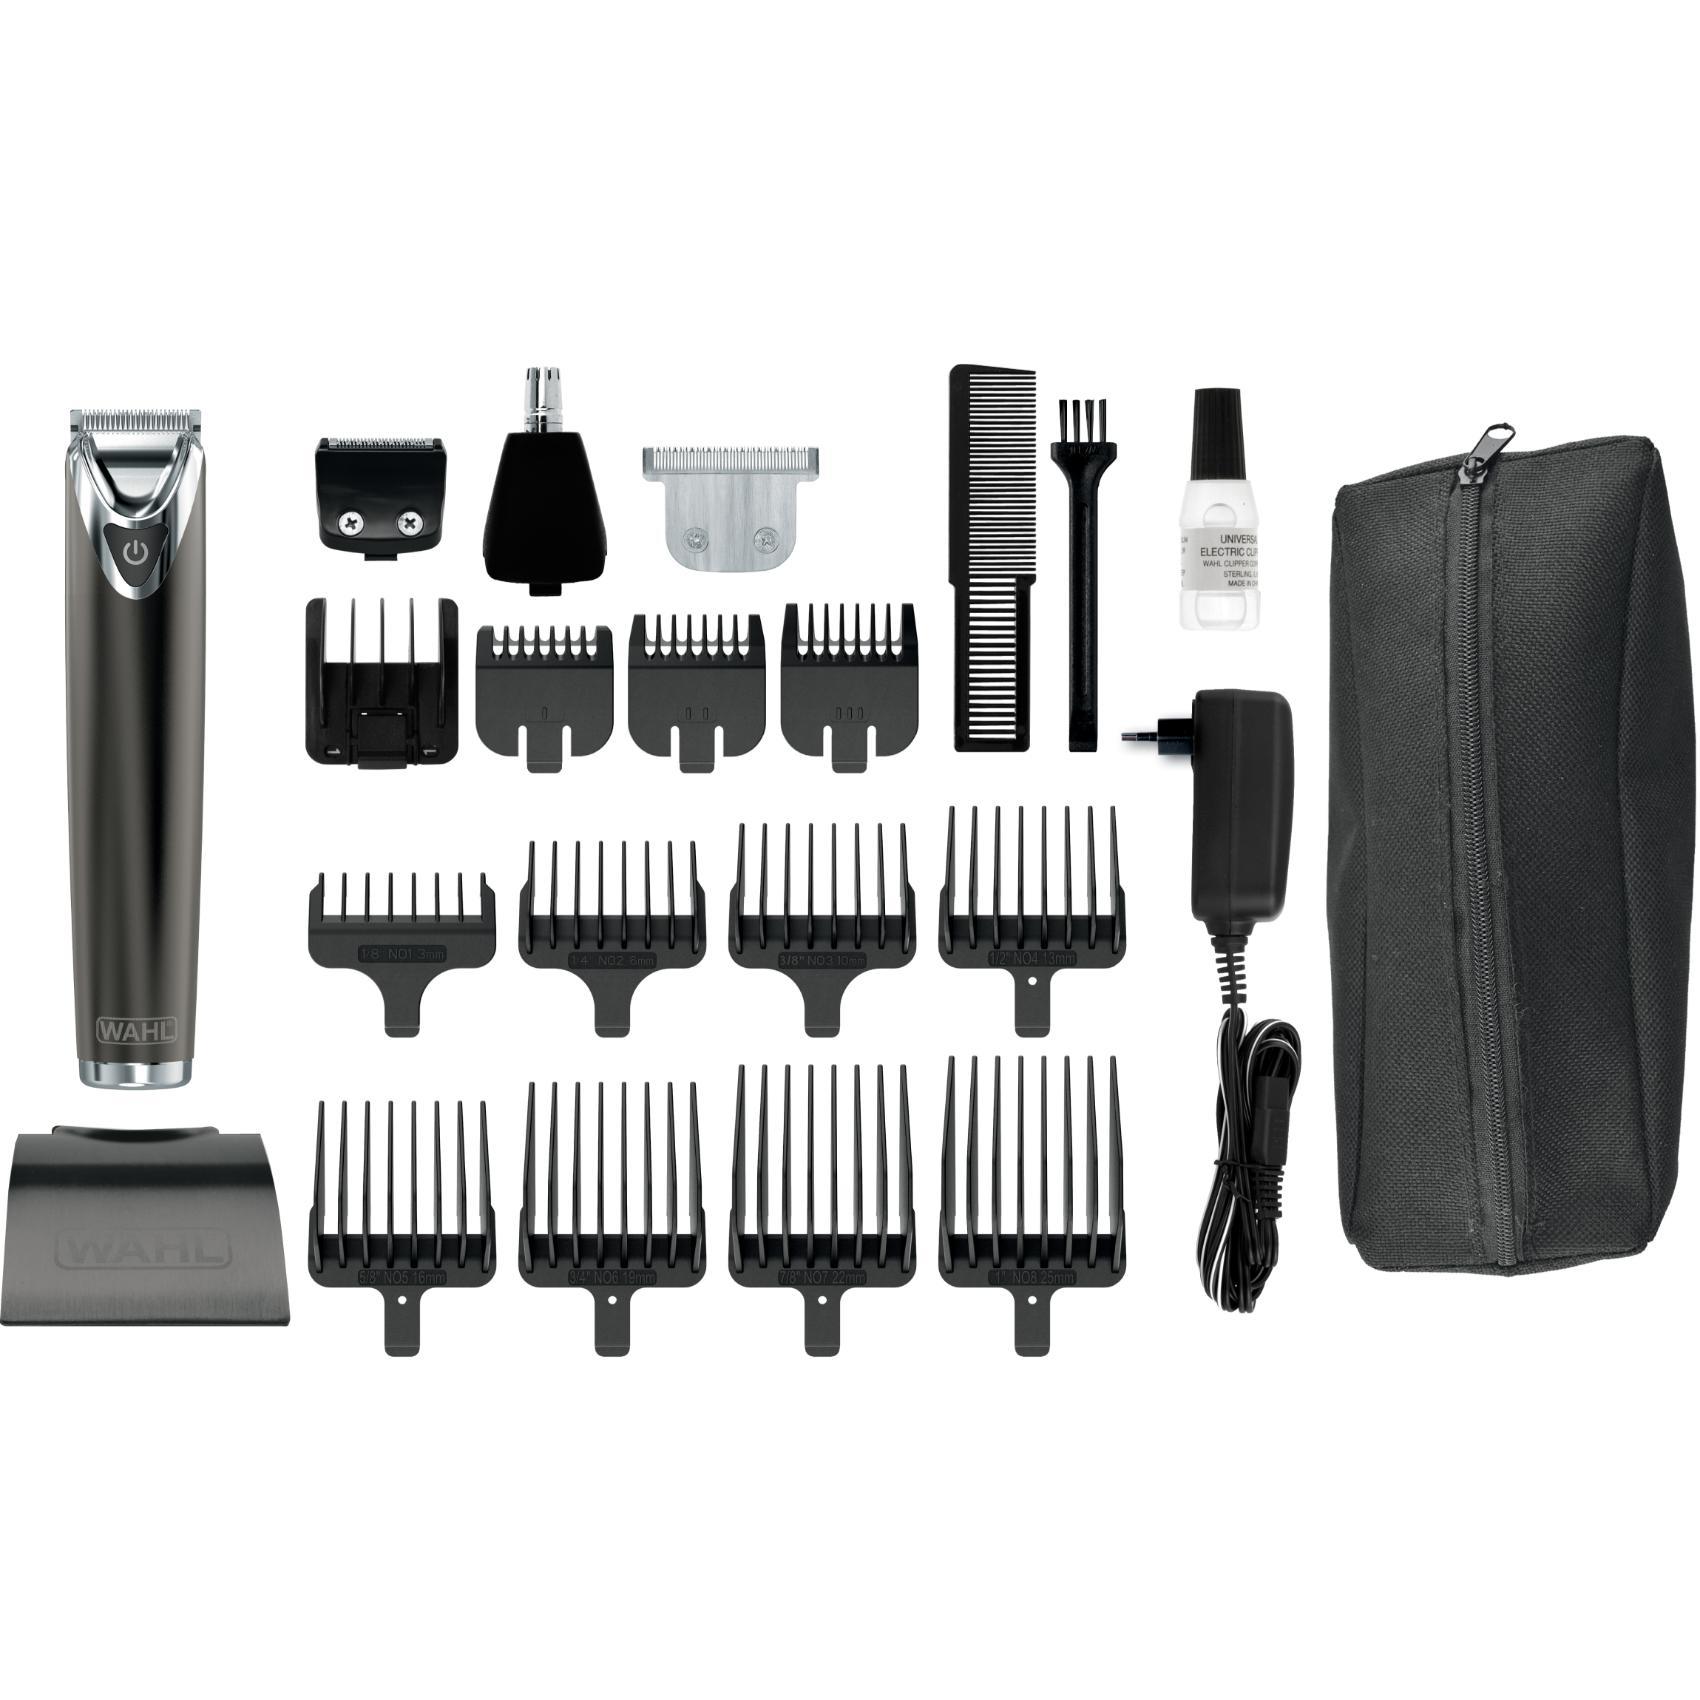 wahl stainless steel lithium ion 2.0